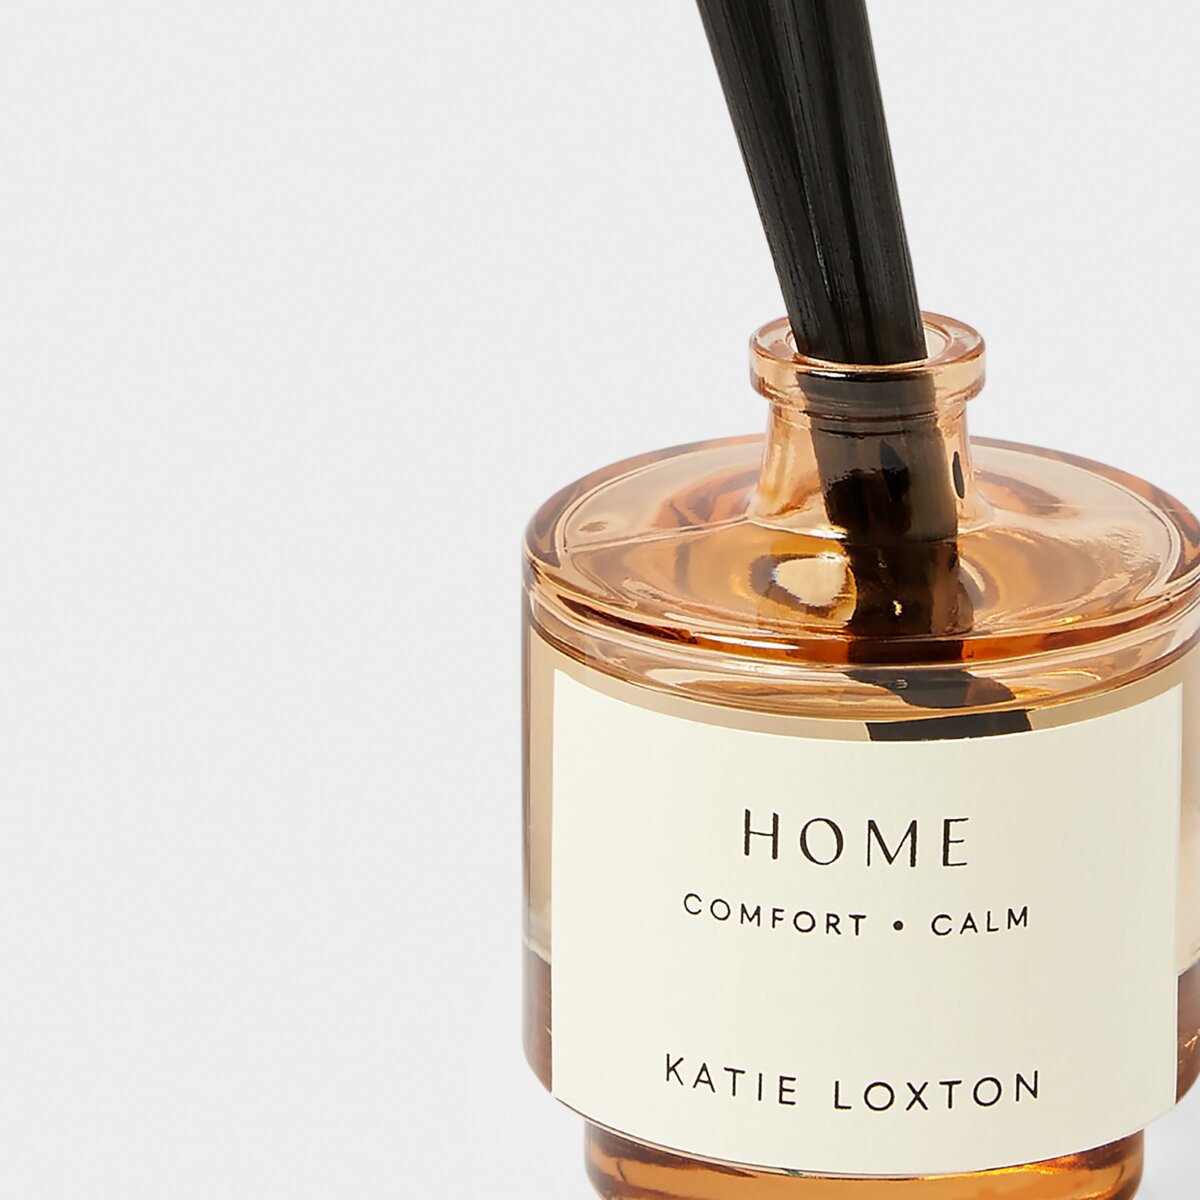 Close up of reed diffuser with amber glass  'Home' on the label